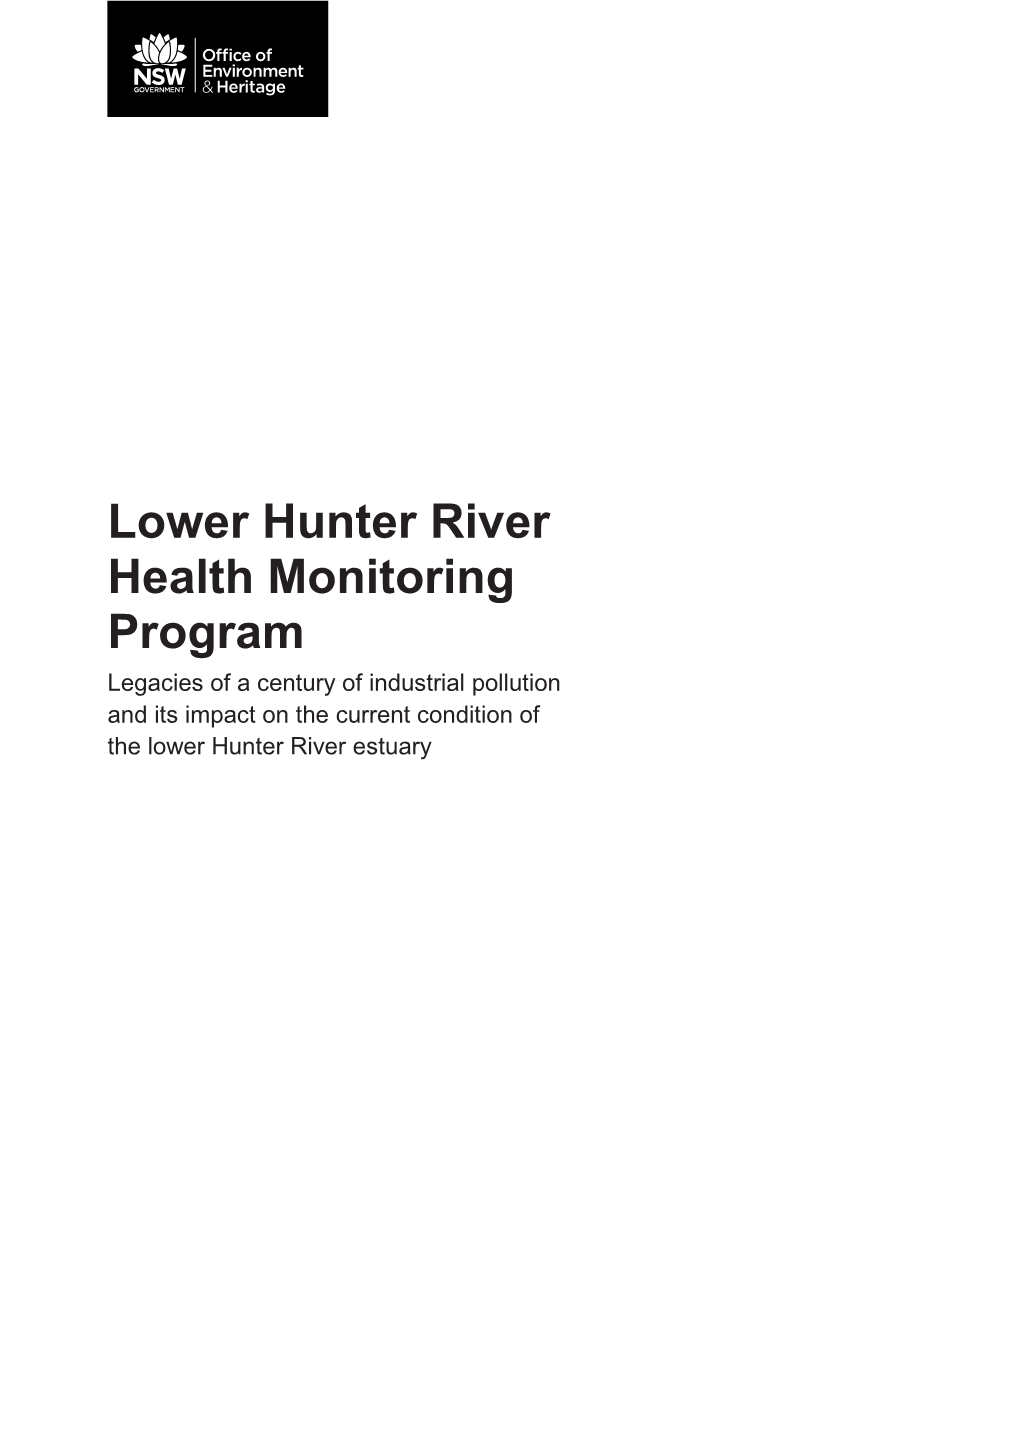 Lower Hunter River Health Monitoring Program Legacies of a Century of Industrial Pollution and Its Impact on the Current Condition of the Lower Hunter River Estuary